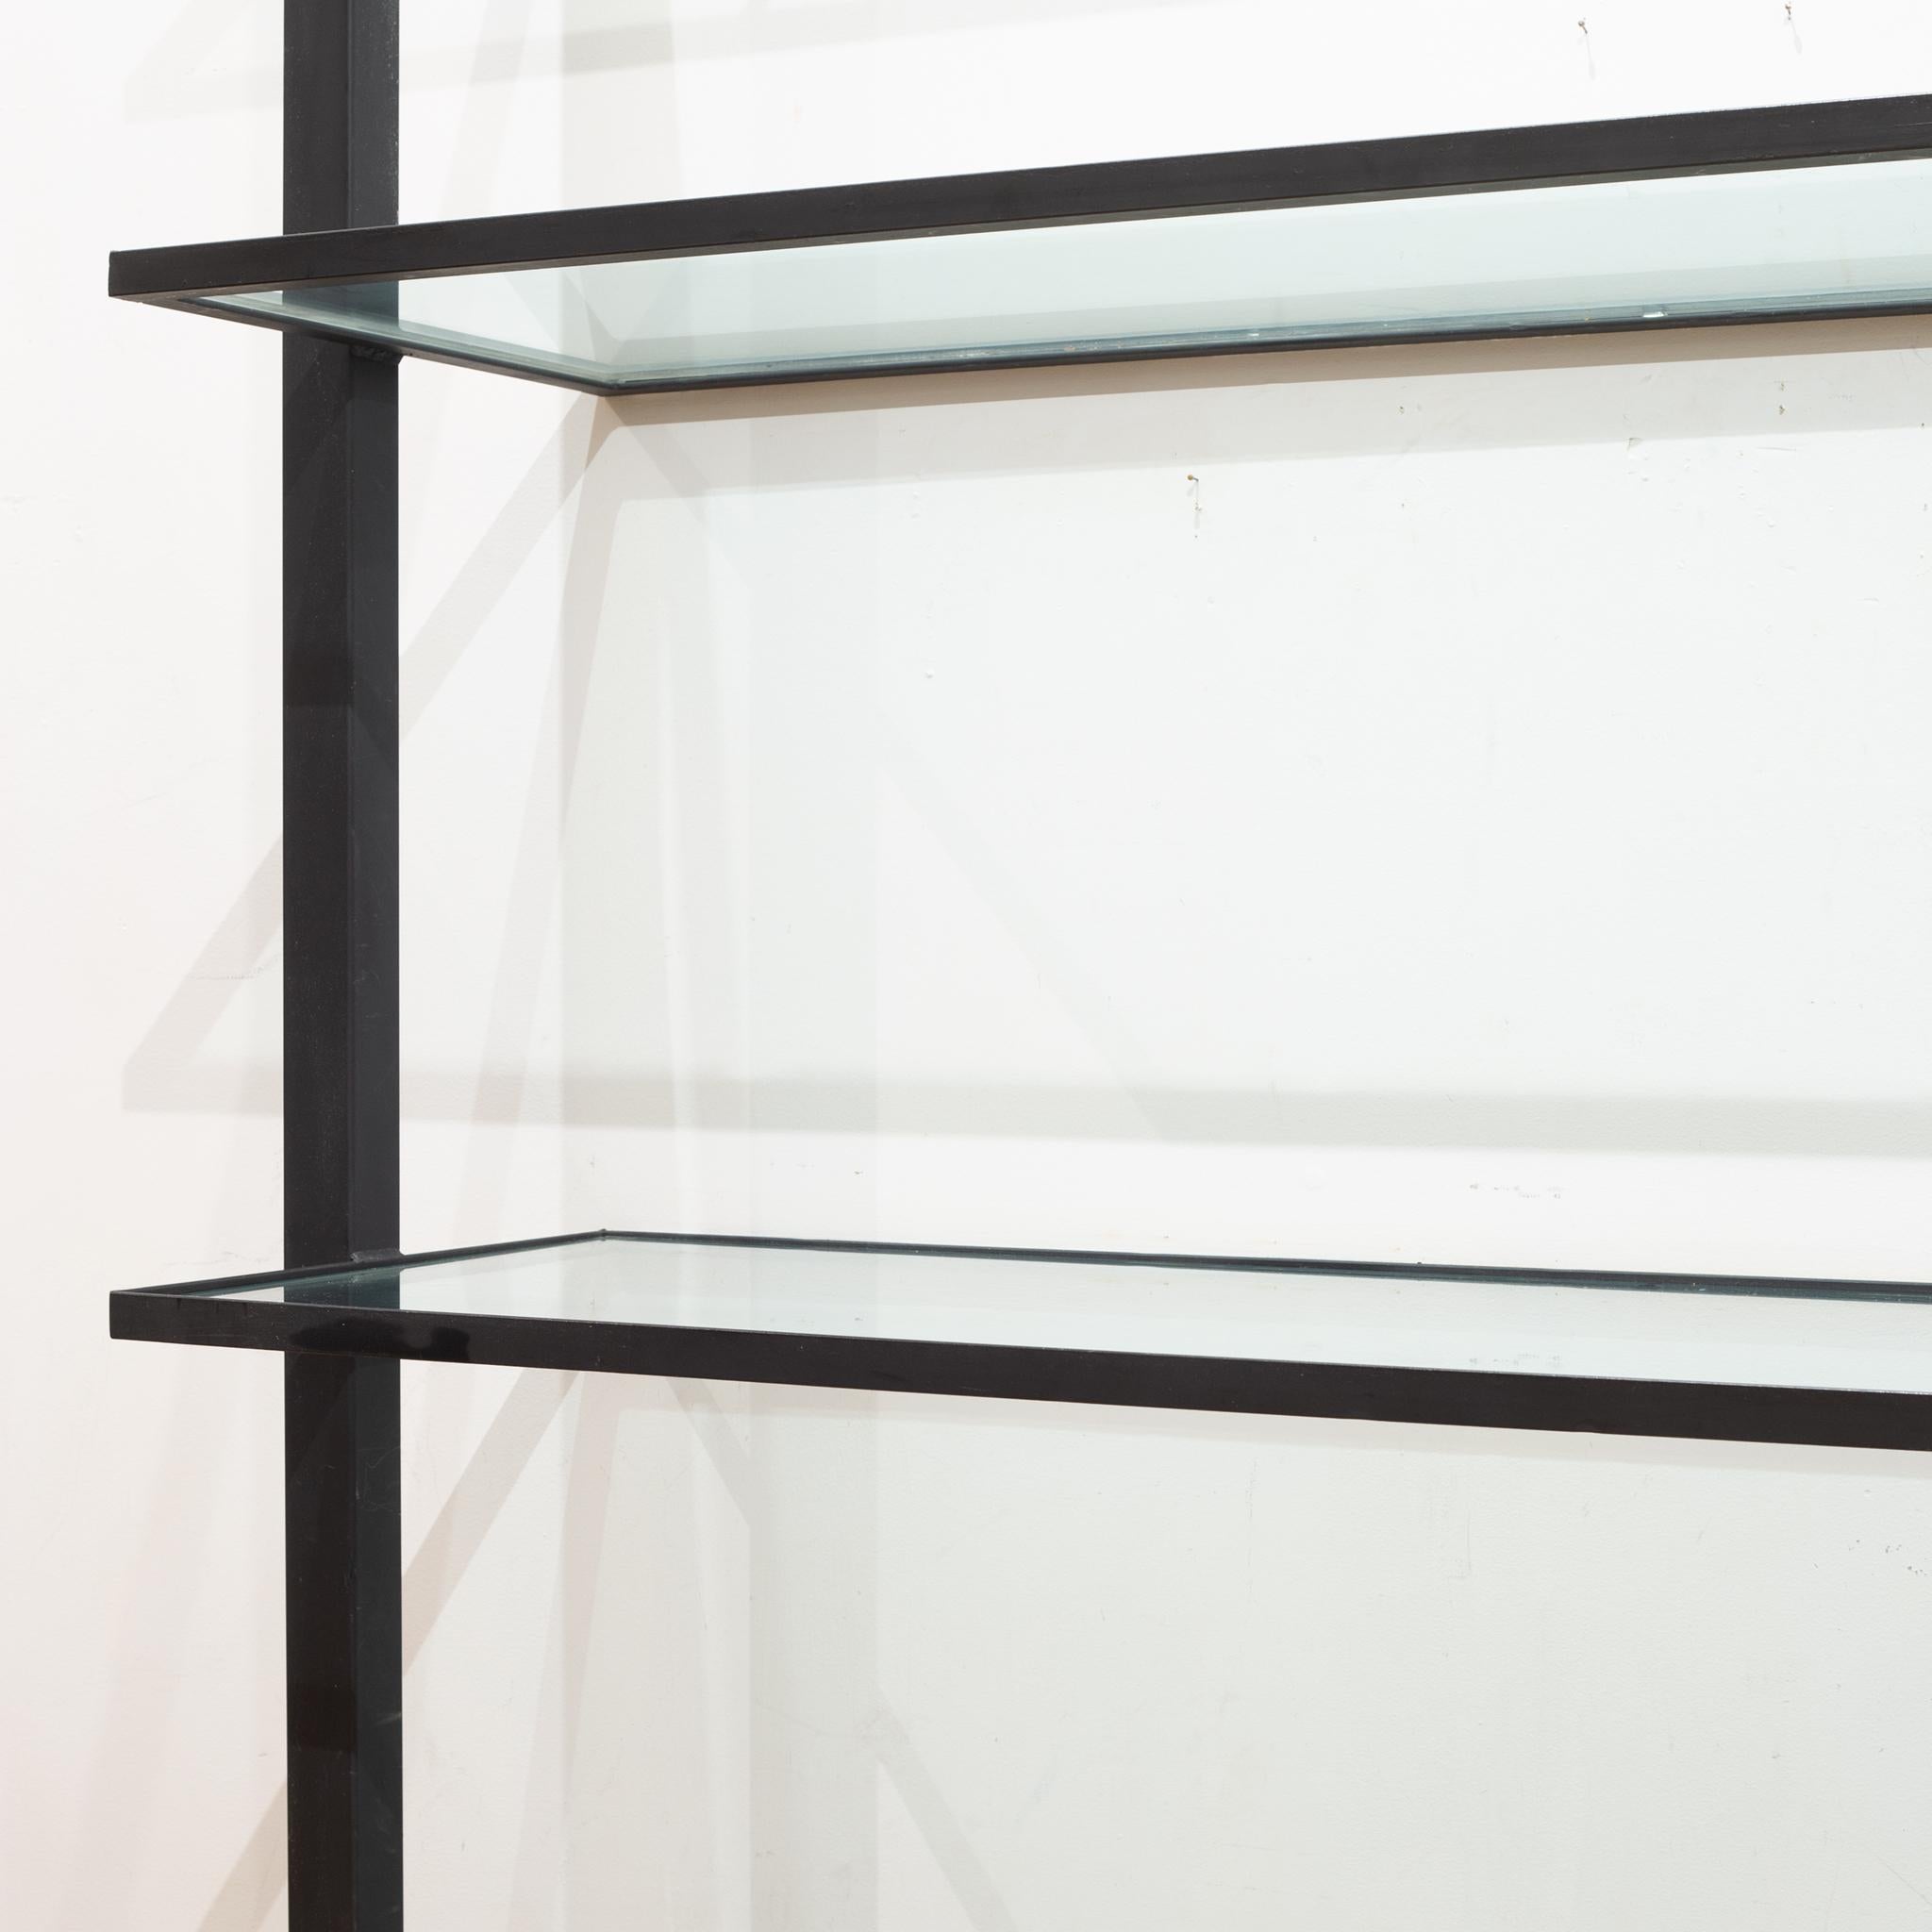 Large Custom Floating Steel and Glass Shelf c. 2014 For Sale 4